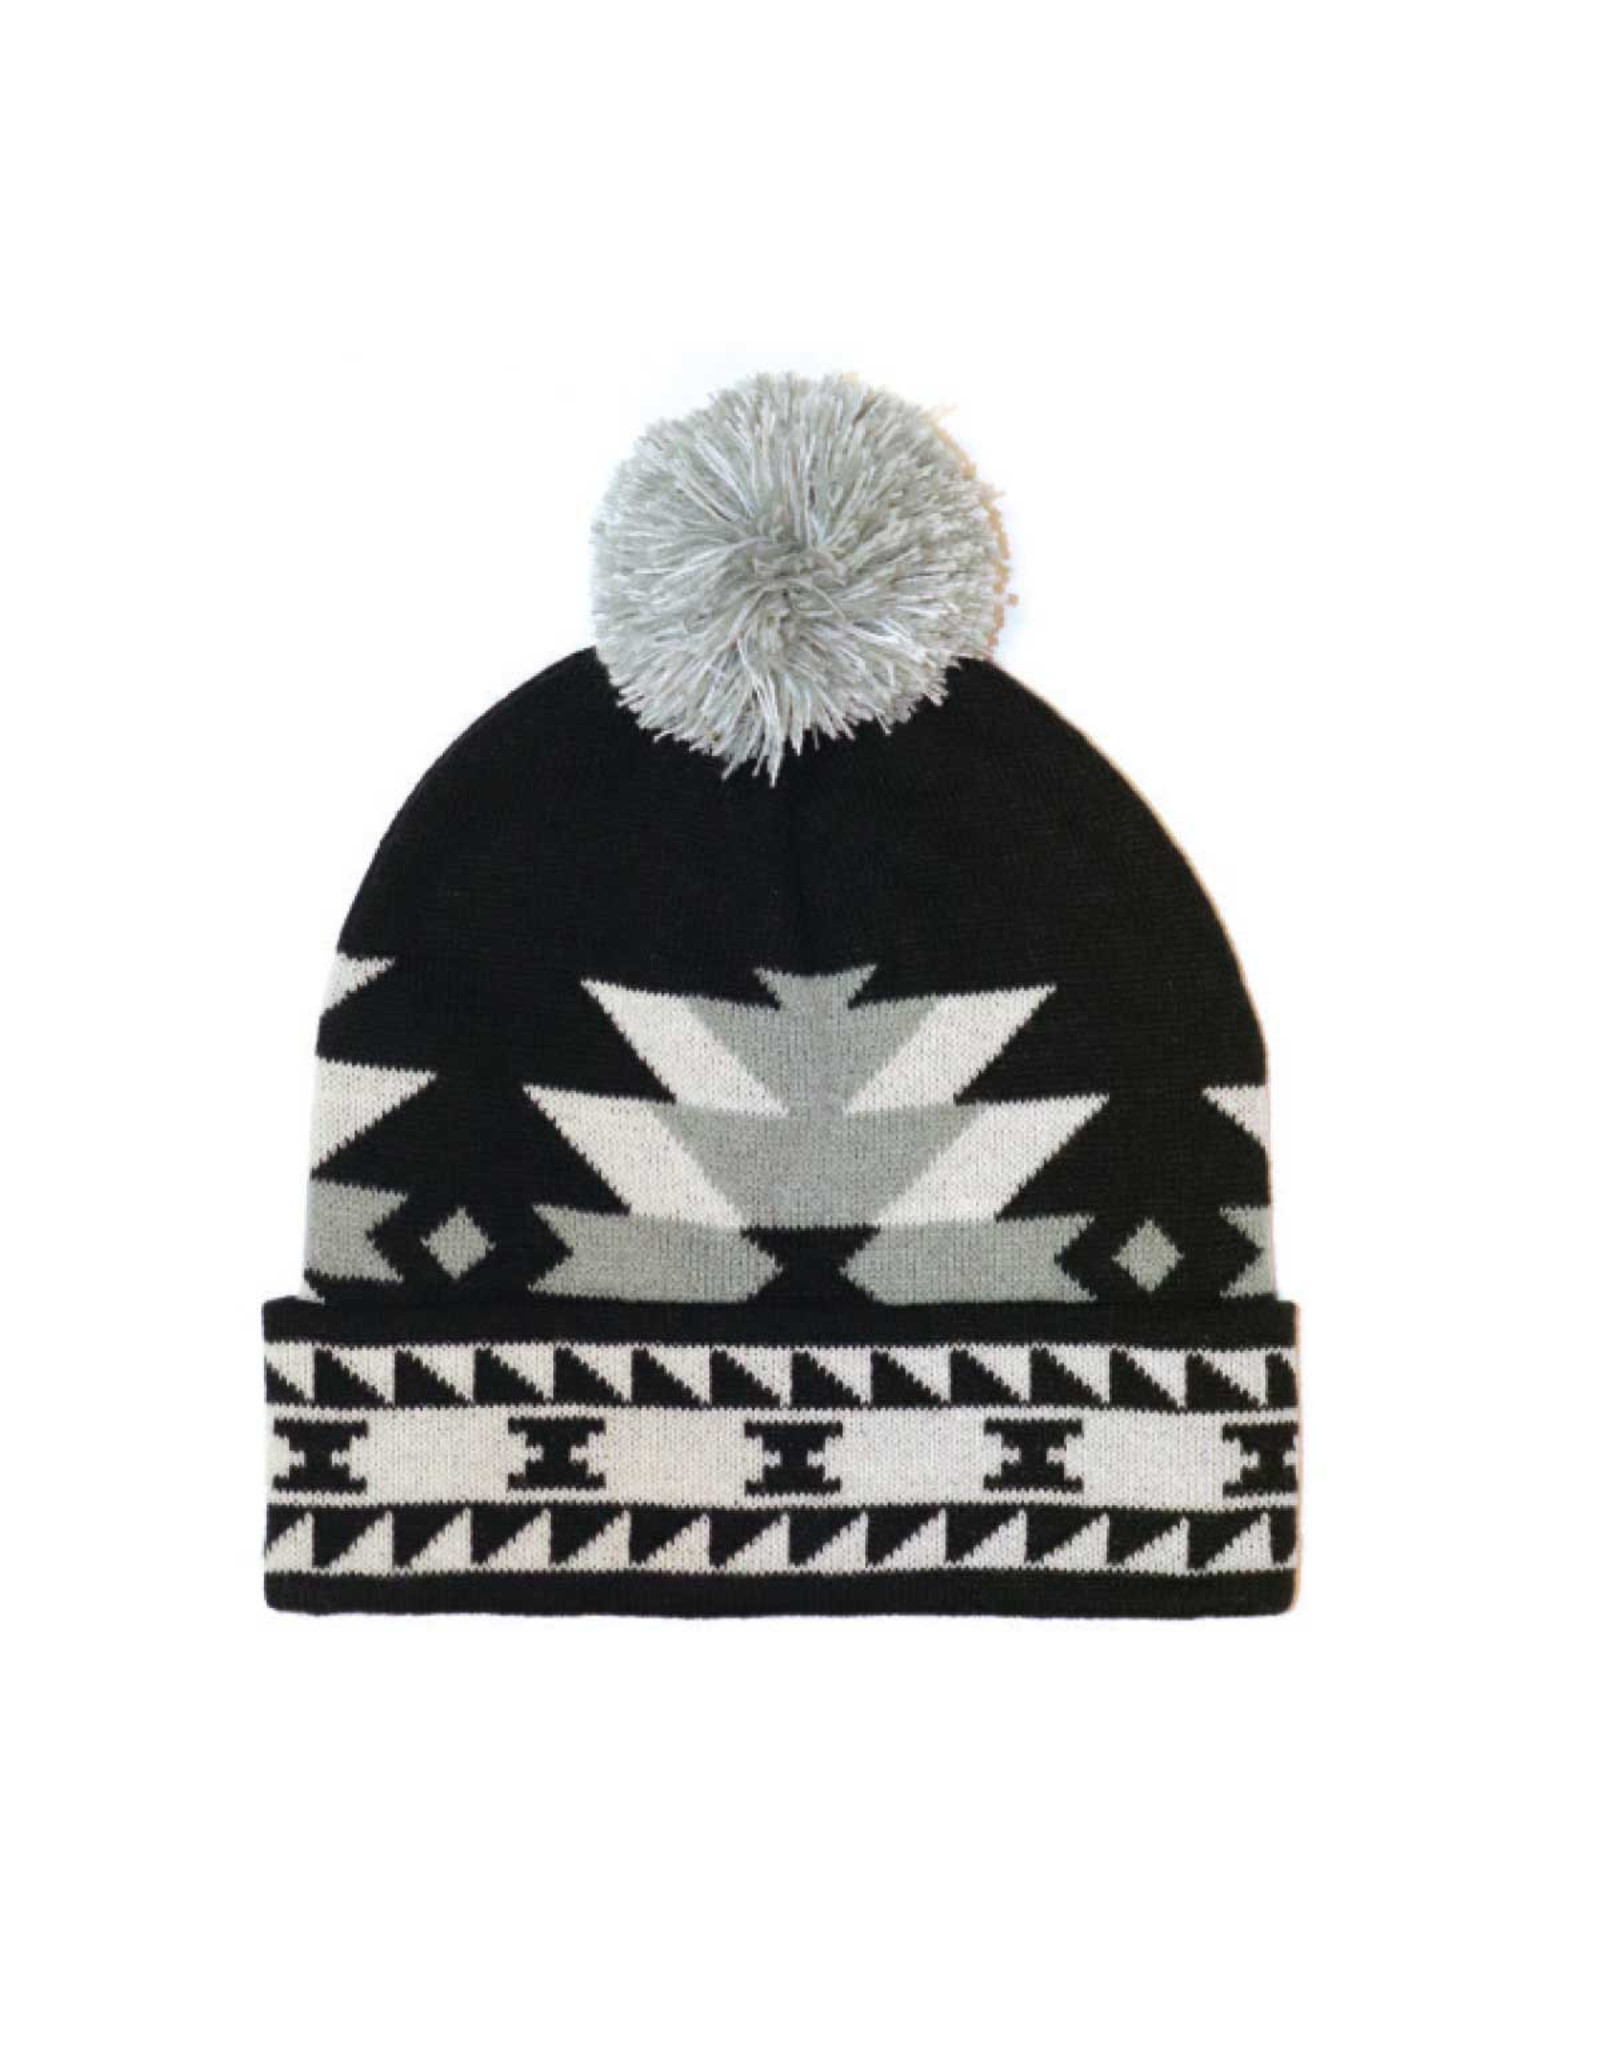 Knitted Tuque with Pom Pom - Salish Weaving Collection - Visions of Our Ancestors by Leila Stogan (TQSSV)